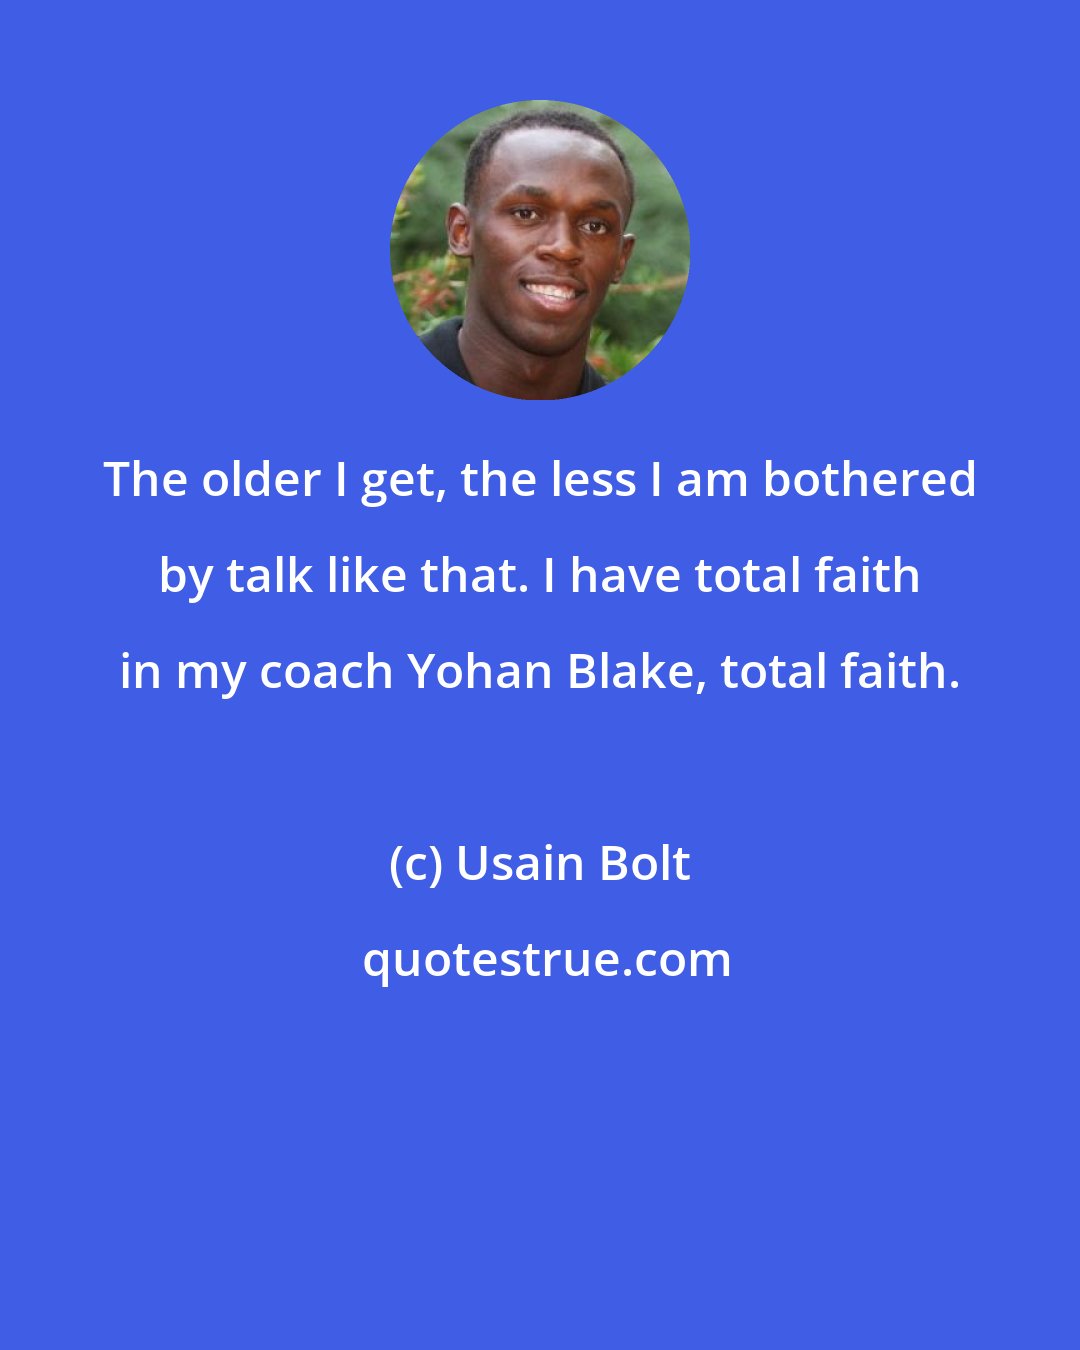 Usain Bolt: The older I get, the less I am bothered by talk like that. I have total faith in my coach Yohan Blake, total faith.